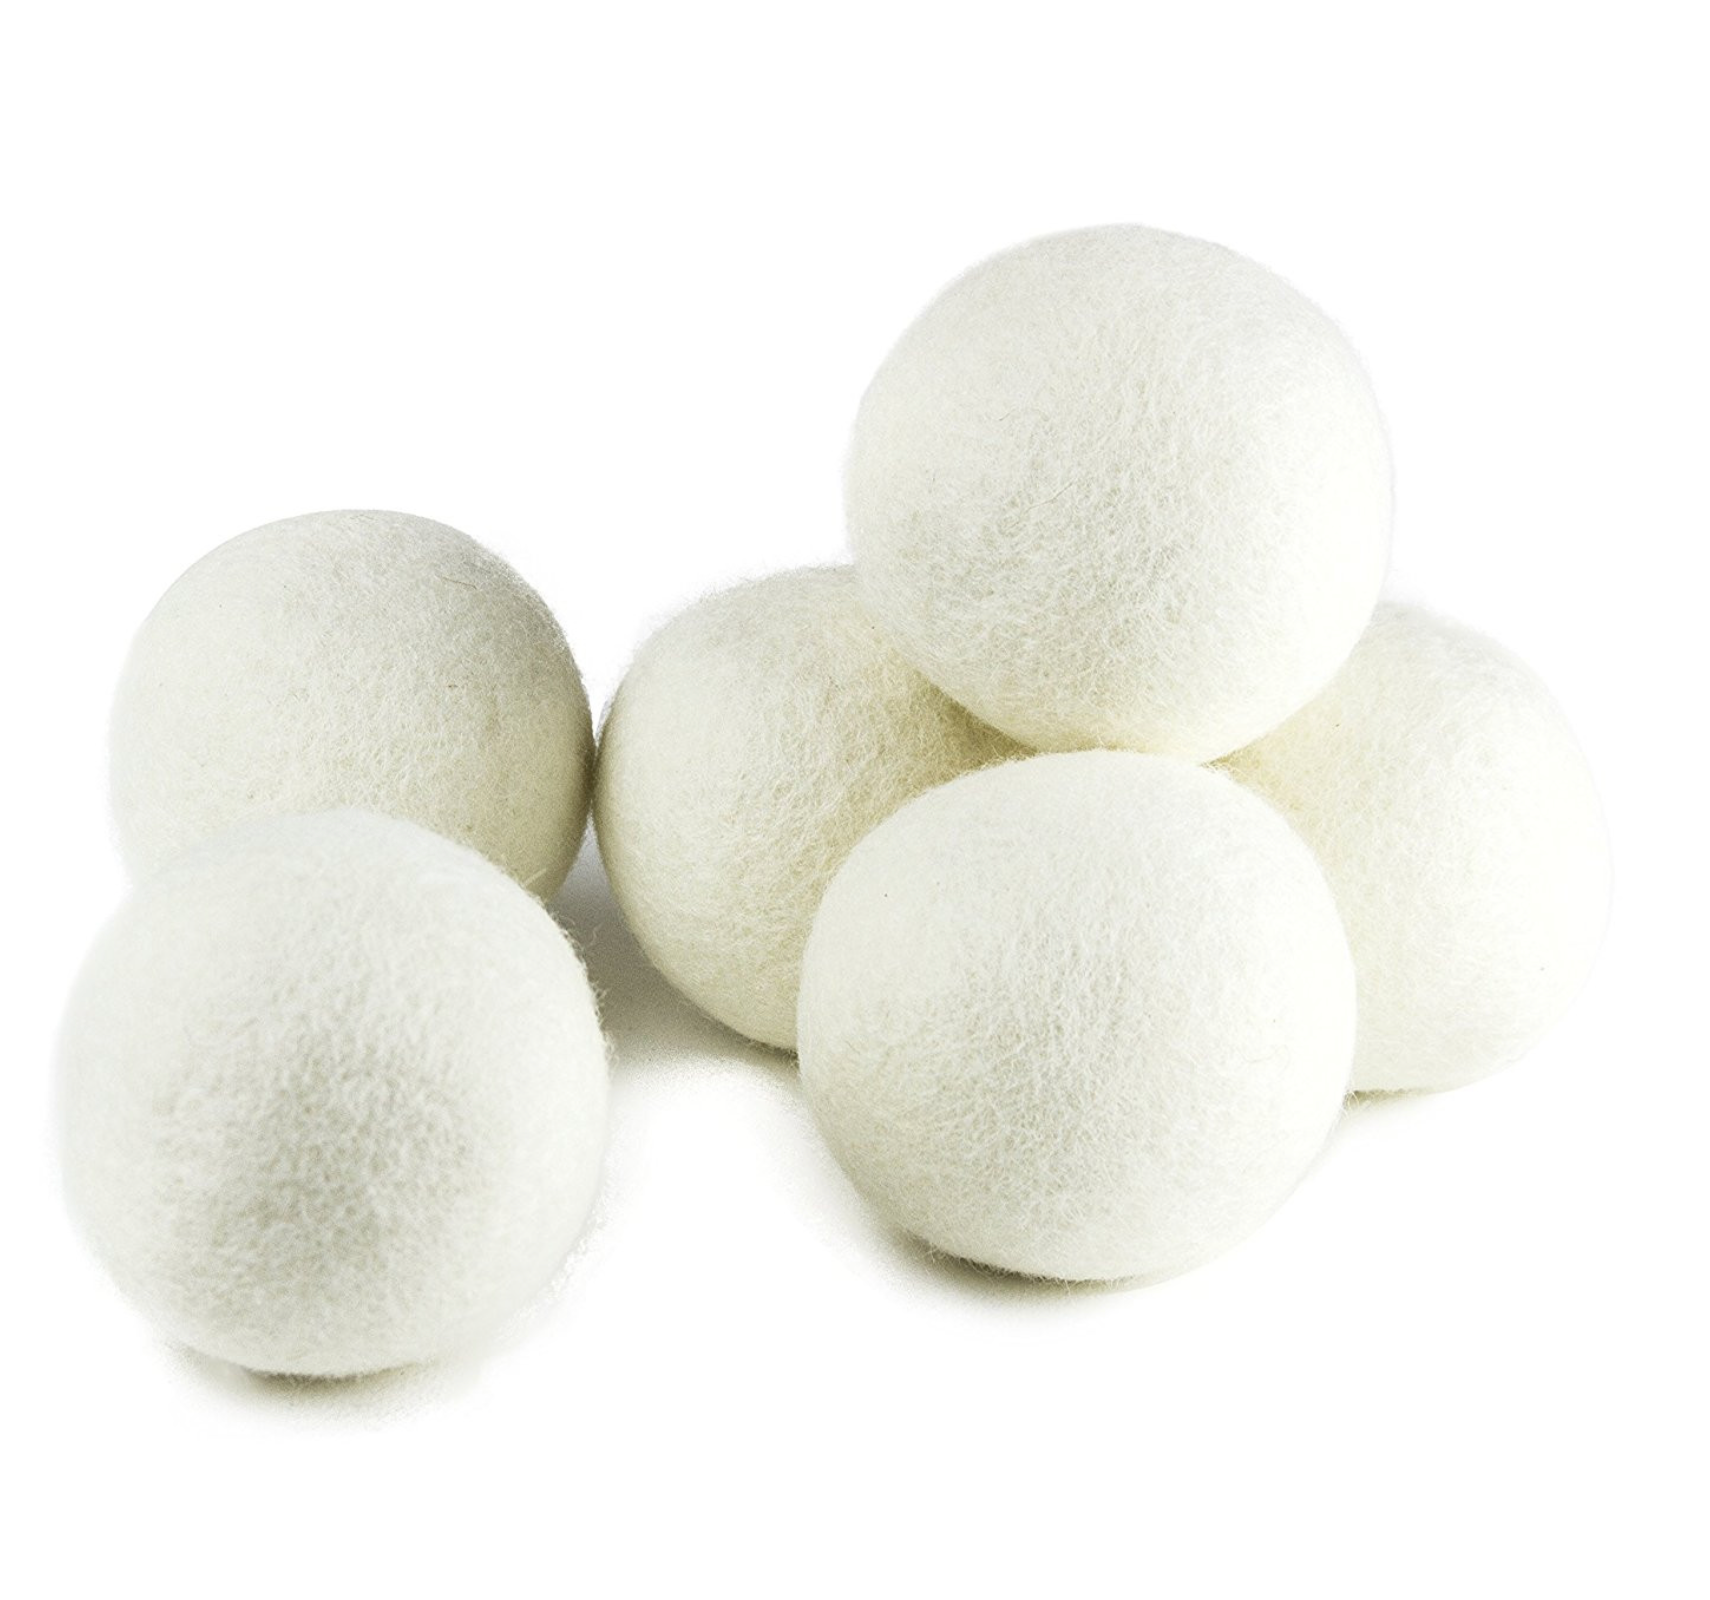 Wool Dryer Balls - Natural Fabric Softener, Reusable, Reduces Clothing  Wrinkles and Saves Drying Time. The Large Dryer Ball is a Better  Alternative to